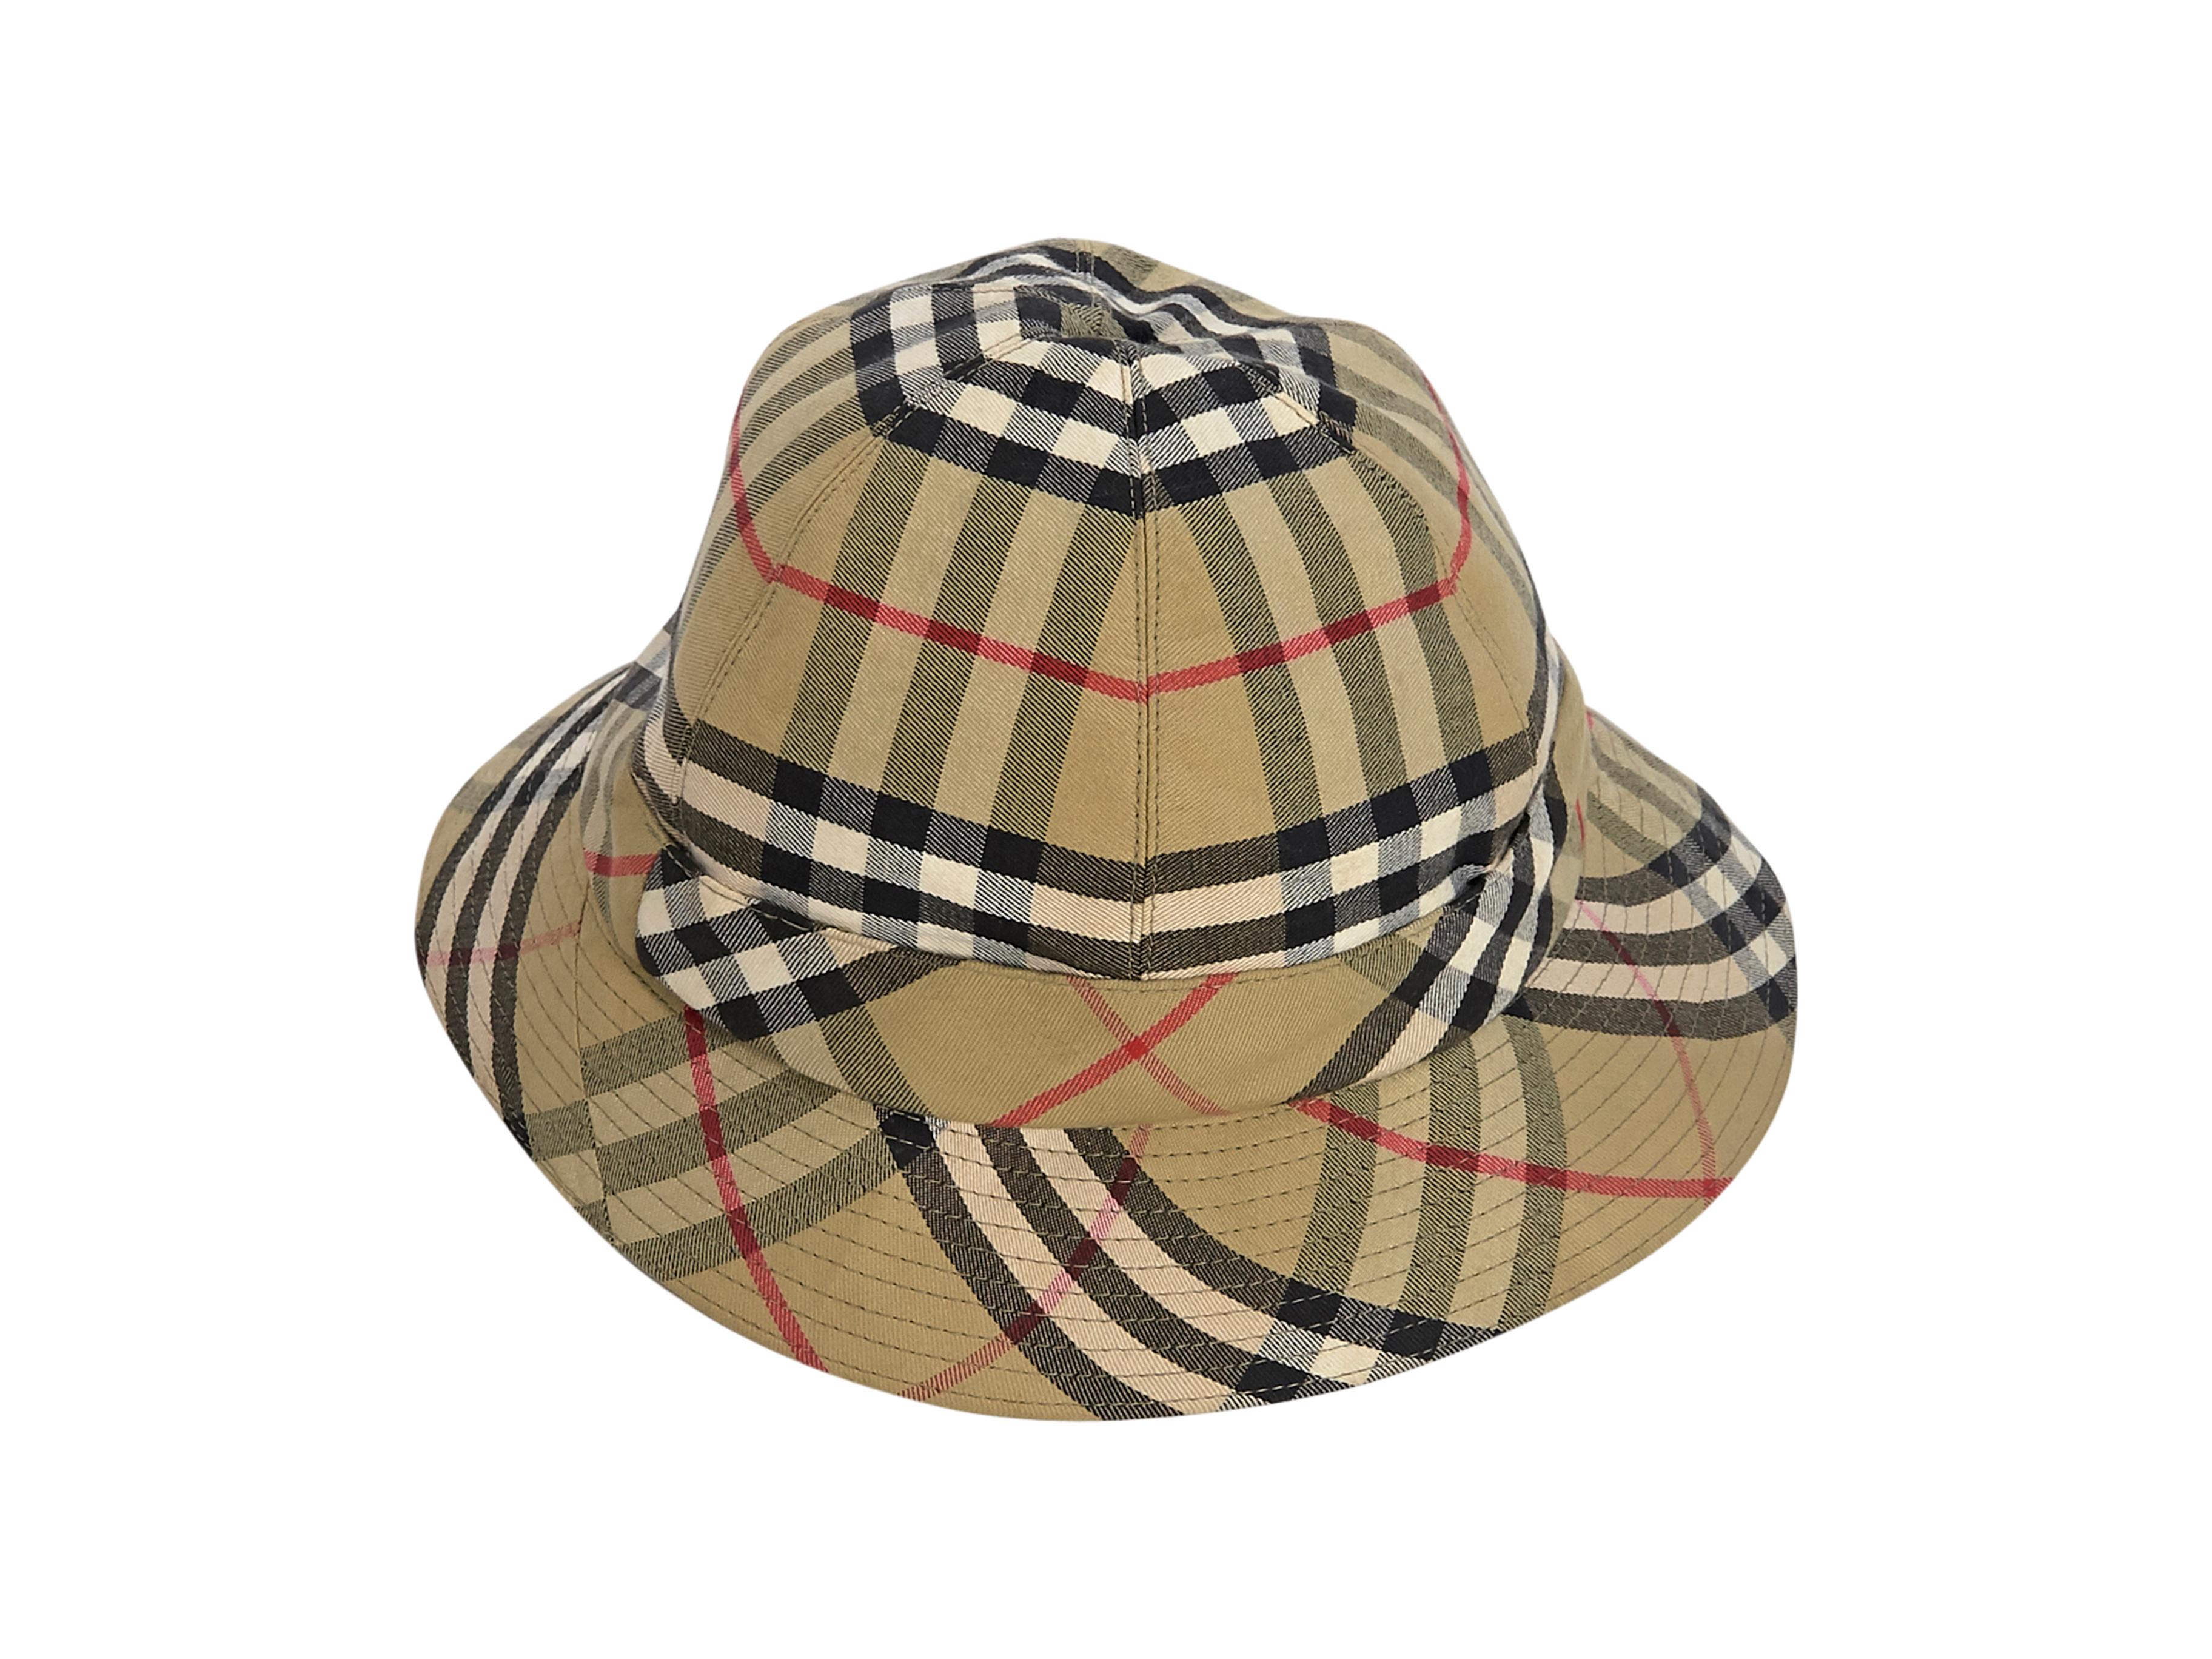 Product details:  Multicolor plaid cotton bucket hat by Burberry.  Lined interior.  22